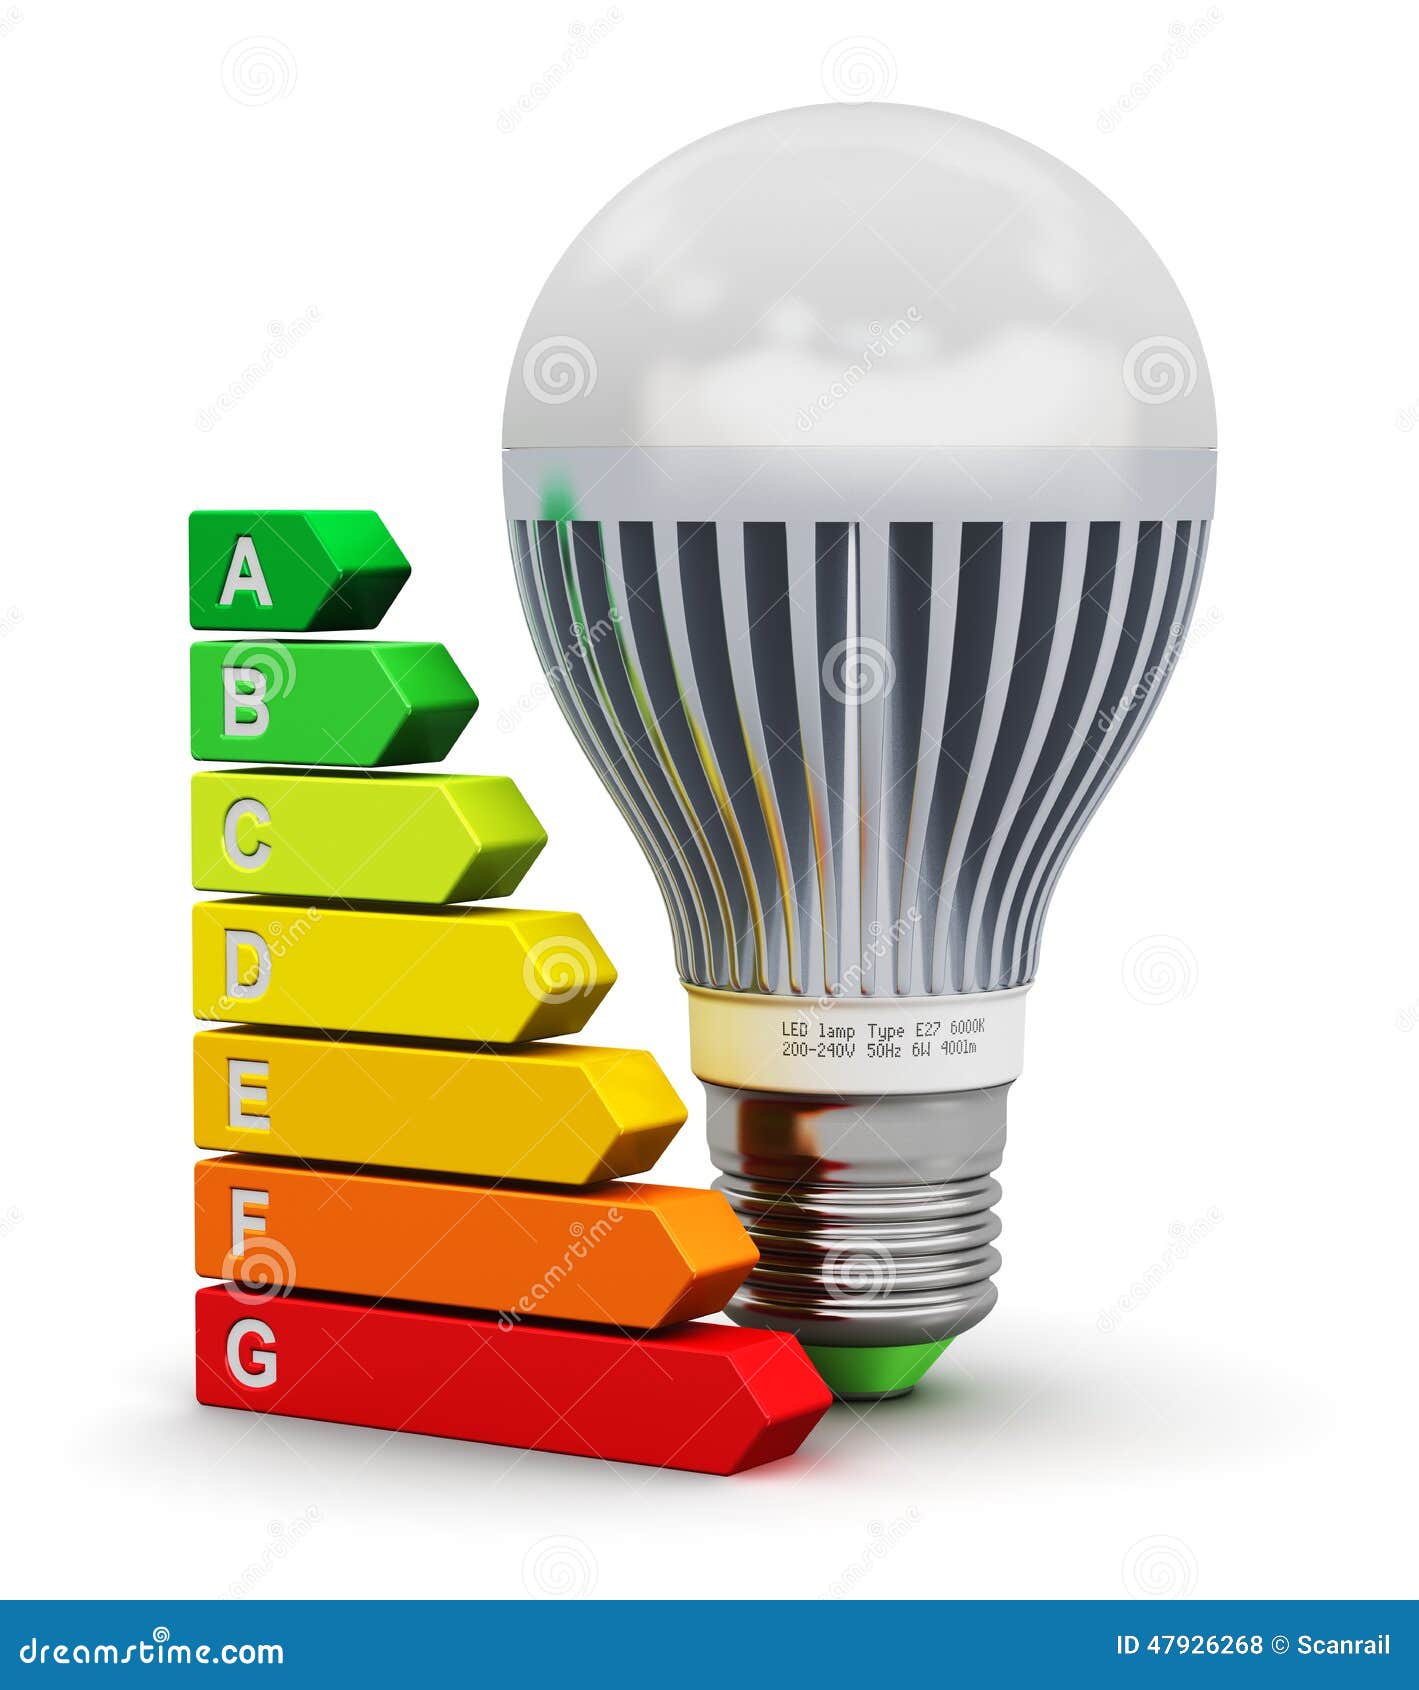 LED Lamp And Energy Efficiency Rating Scale Stock Illustration - Image